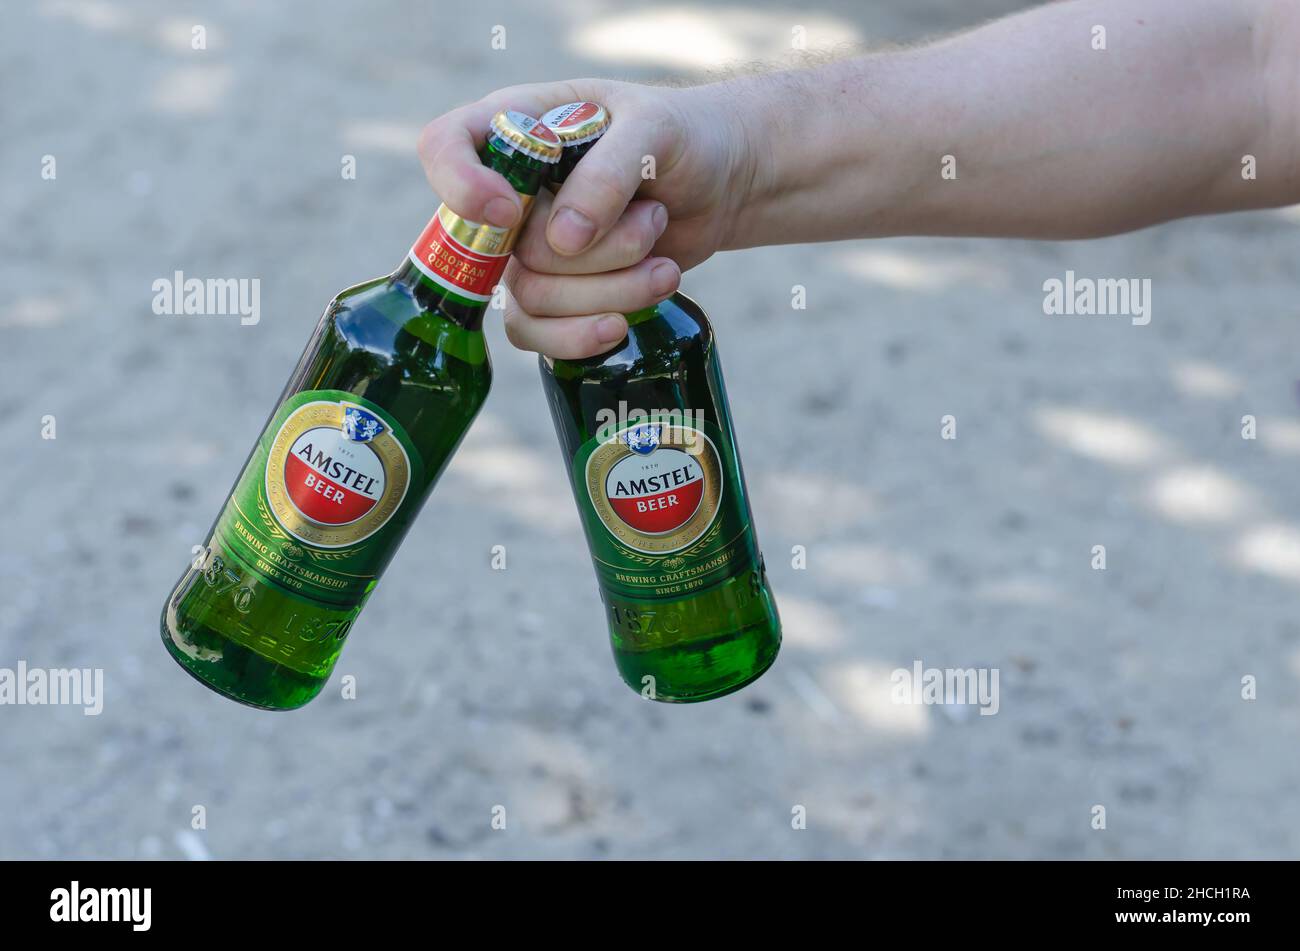 A hand holds two bottles of Amstel beer against the sand. Adult male with green bottles of alcoholic beverage. Nikolaev, Ukraine - 07 13 2021 Stock Photo